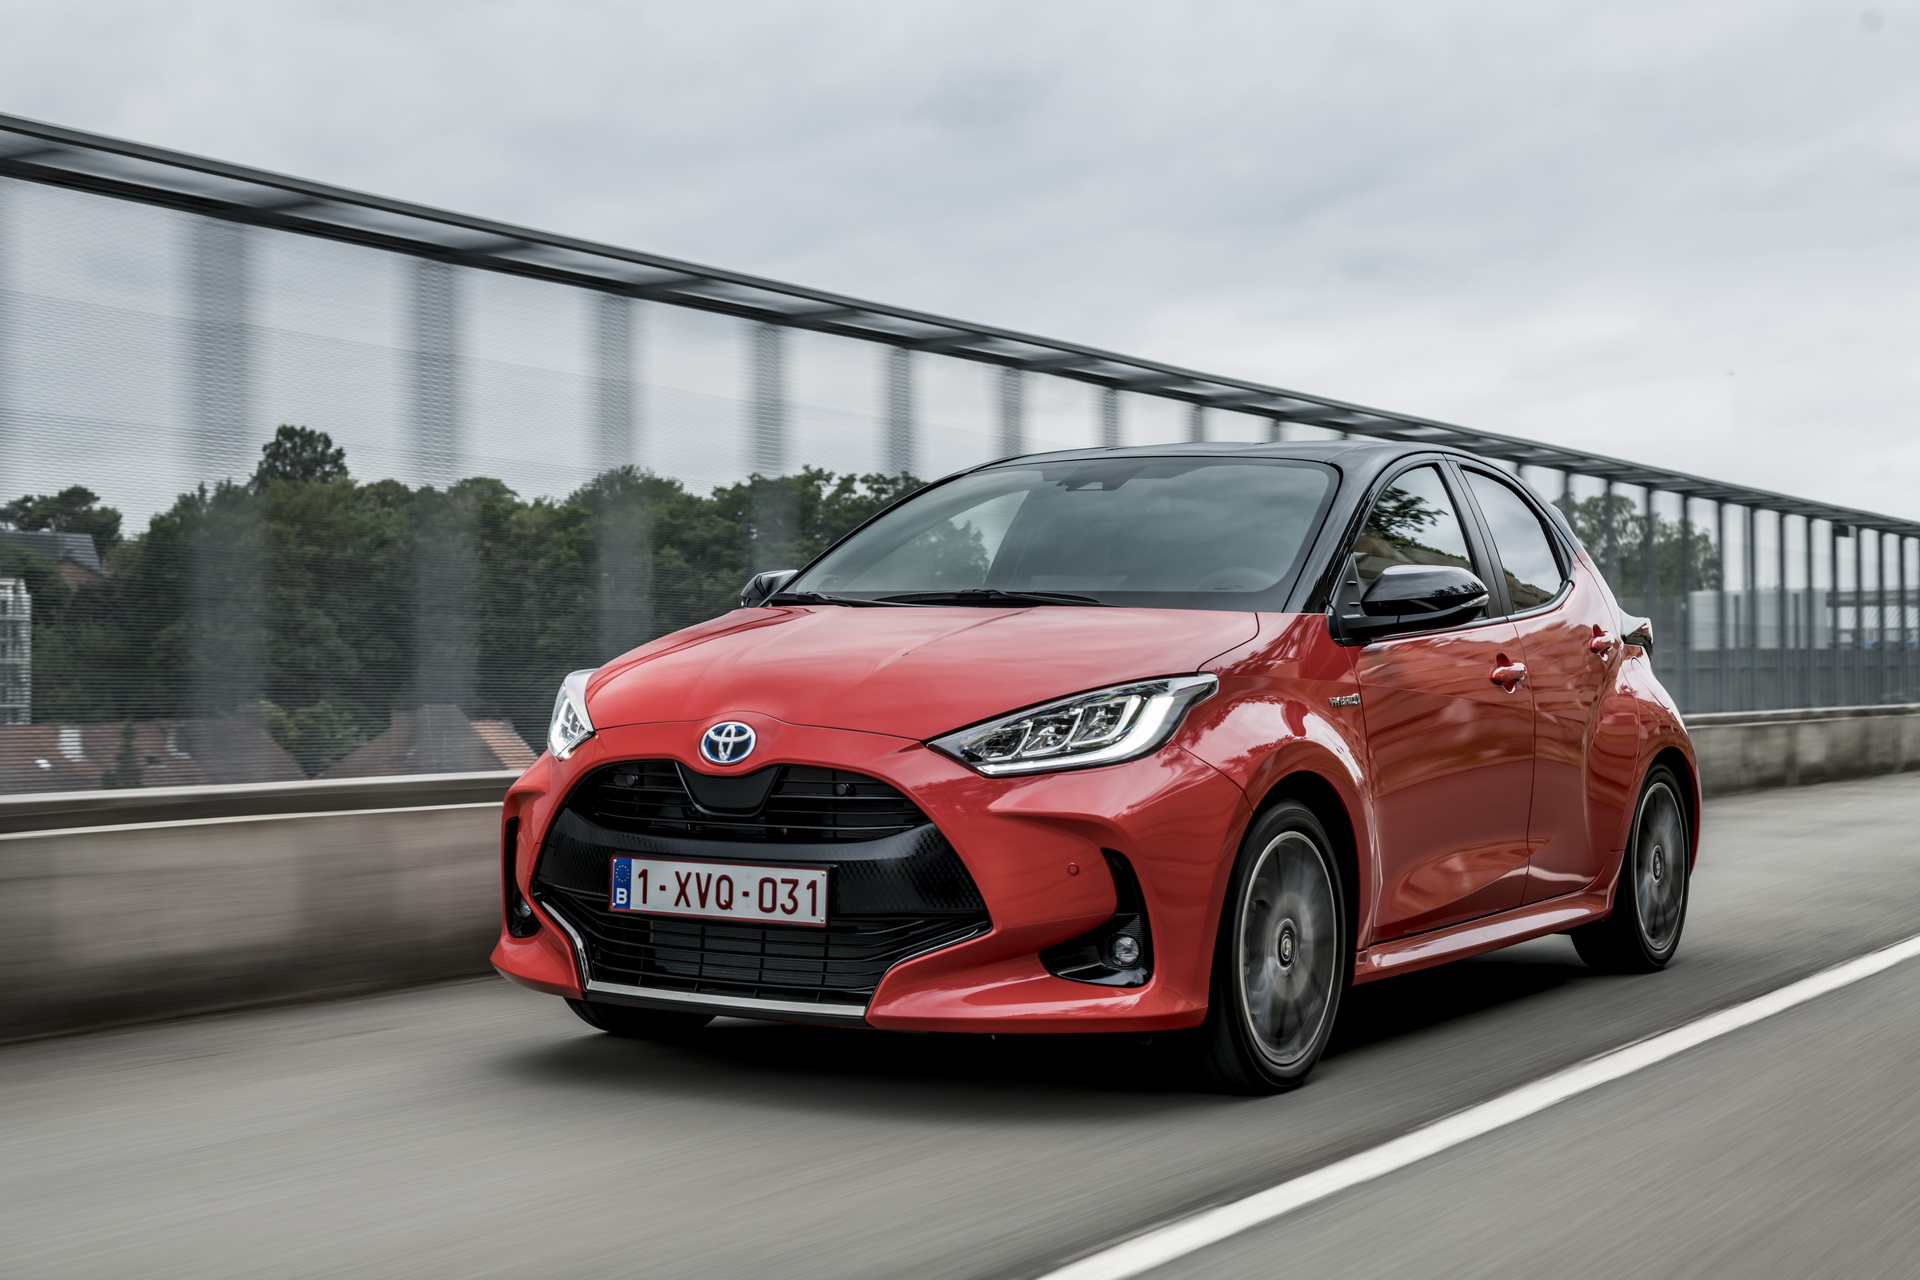 Darts Rustiek Inconsistent 2020 Toyota Yaris Launched In Europe With New 114 HP Hybrid Powertrain |  Carscoops